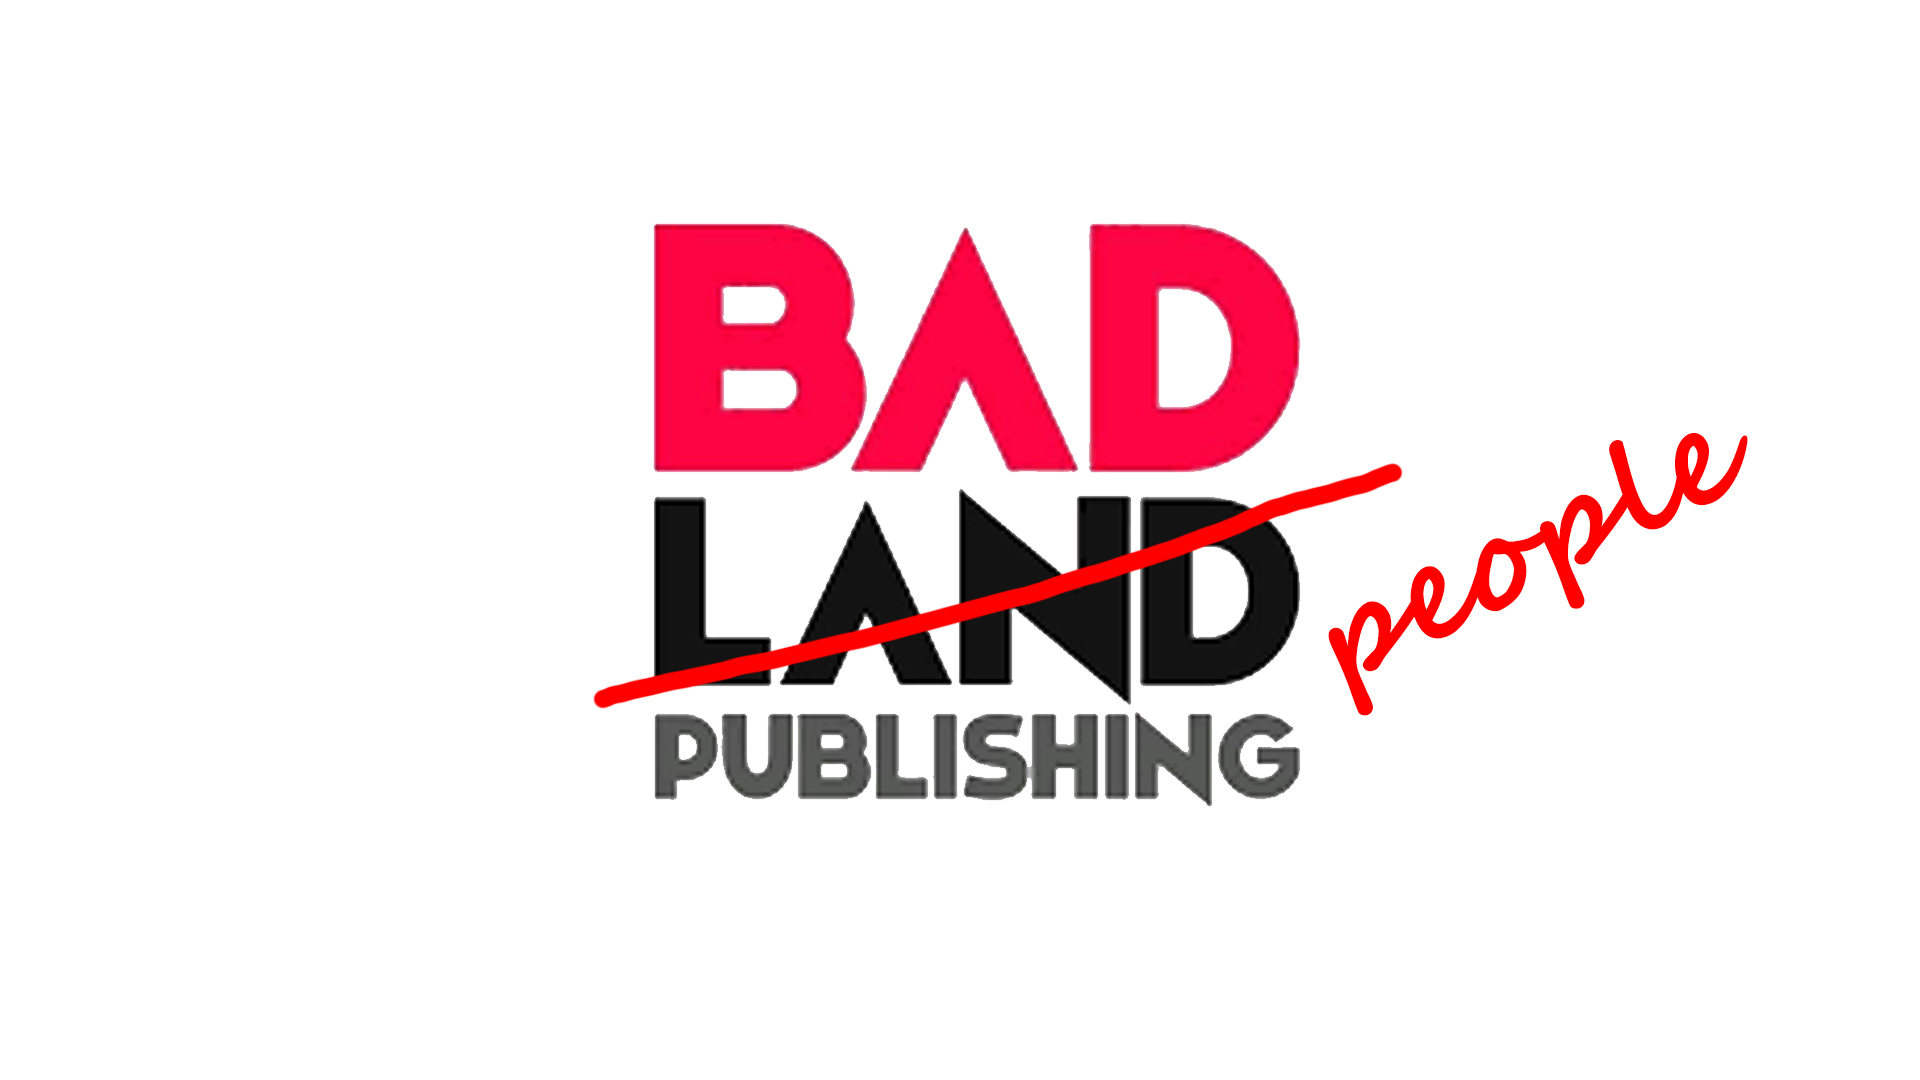 BadLand Publishing Stole Money From a Disabled Toddler